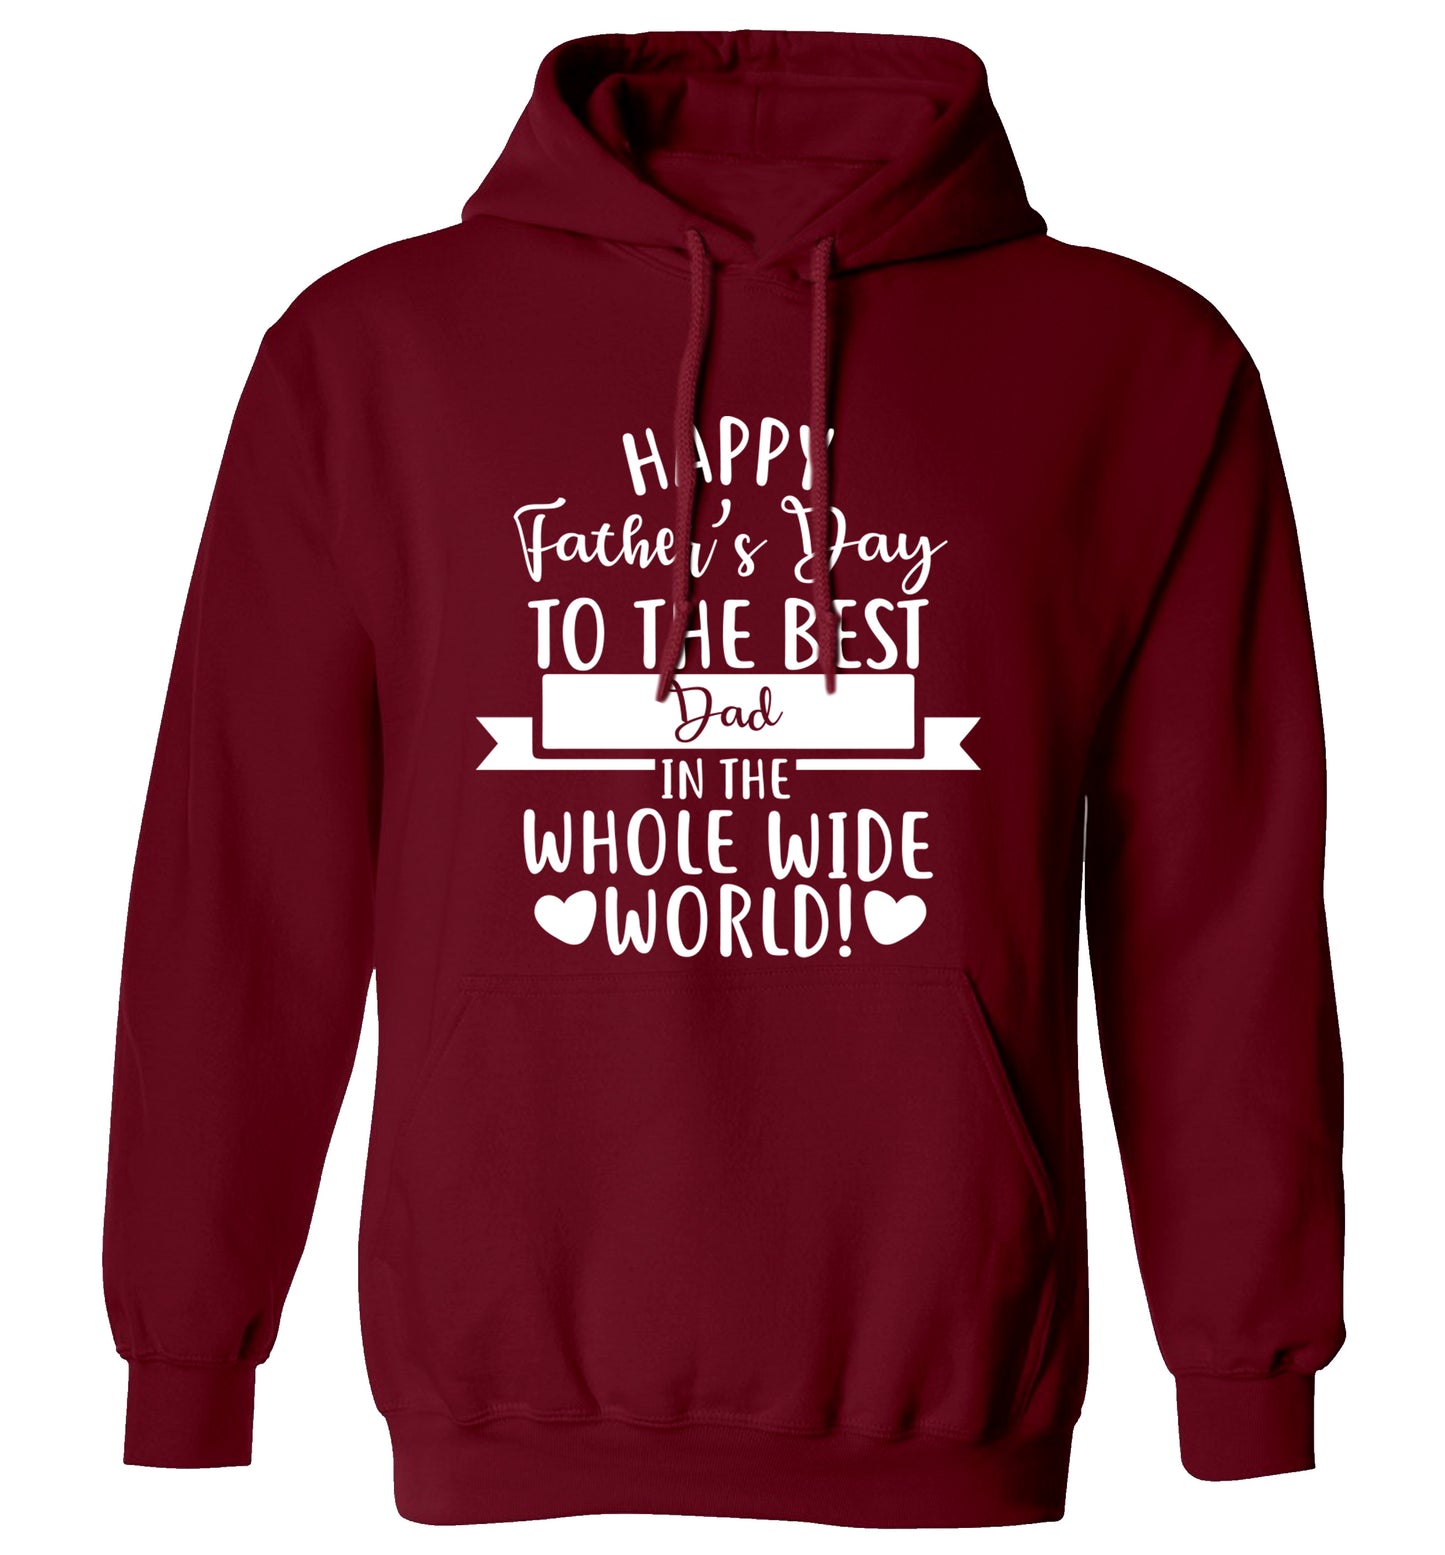 Happy Father's Day to the best father in the world! adults unisex maroon hoodie 2XL